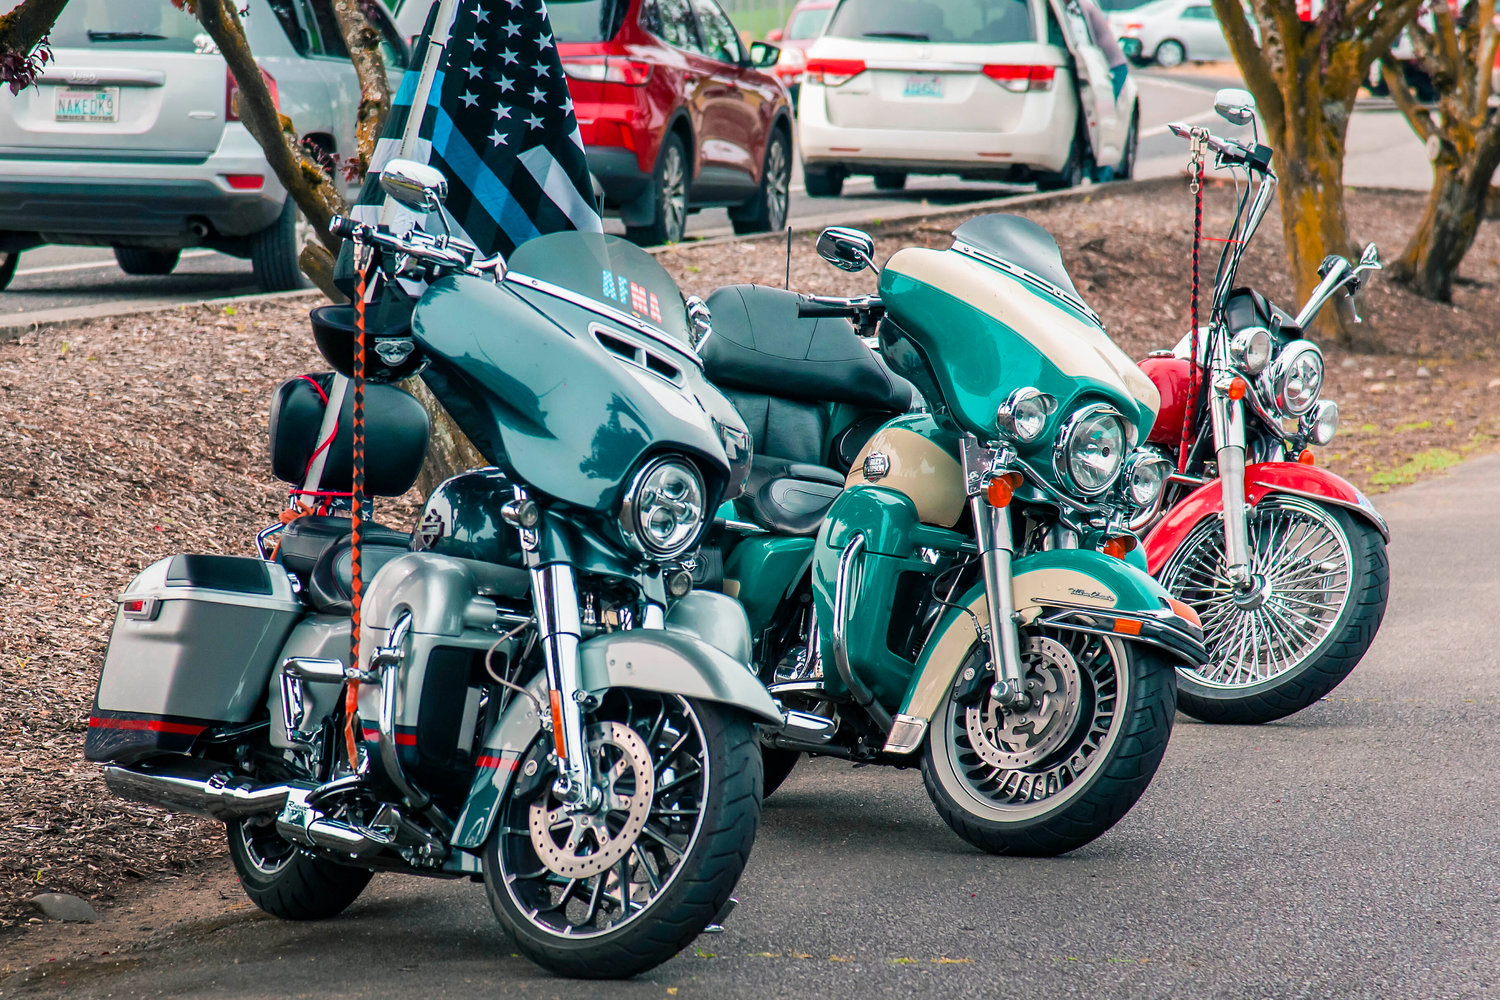 Motorcycles line the parking lot of the Chehalis Washington State Patrol office during a memorial ride for trooper Justin R. Schaffer on Sunday.